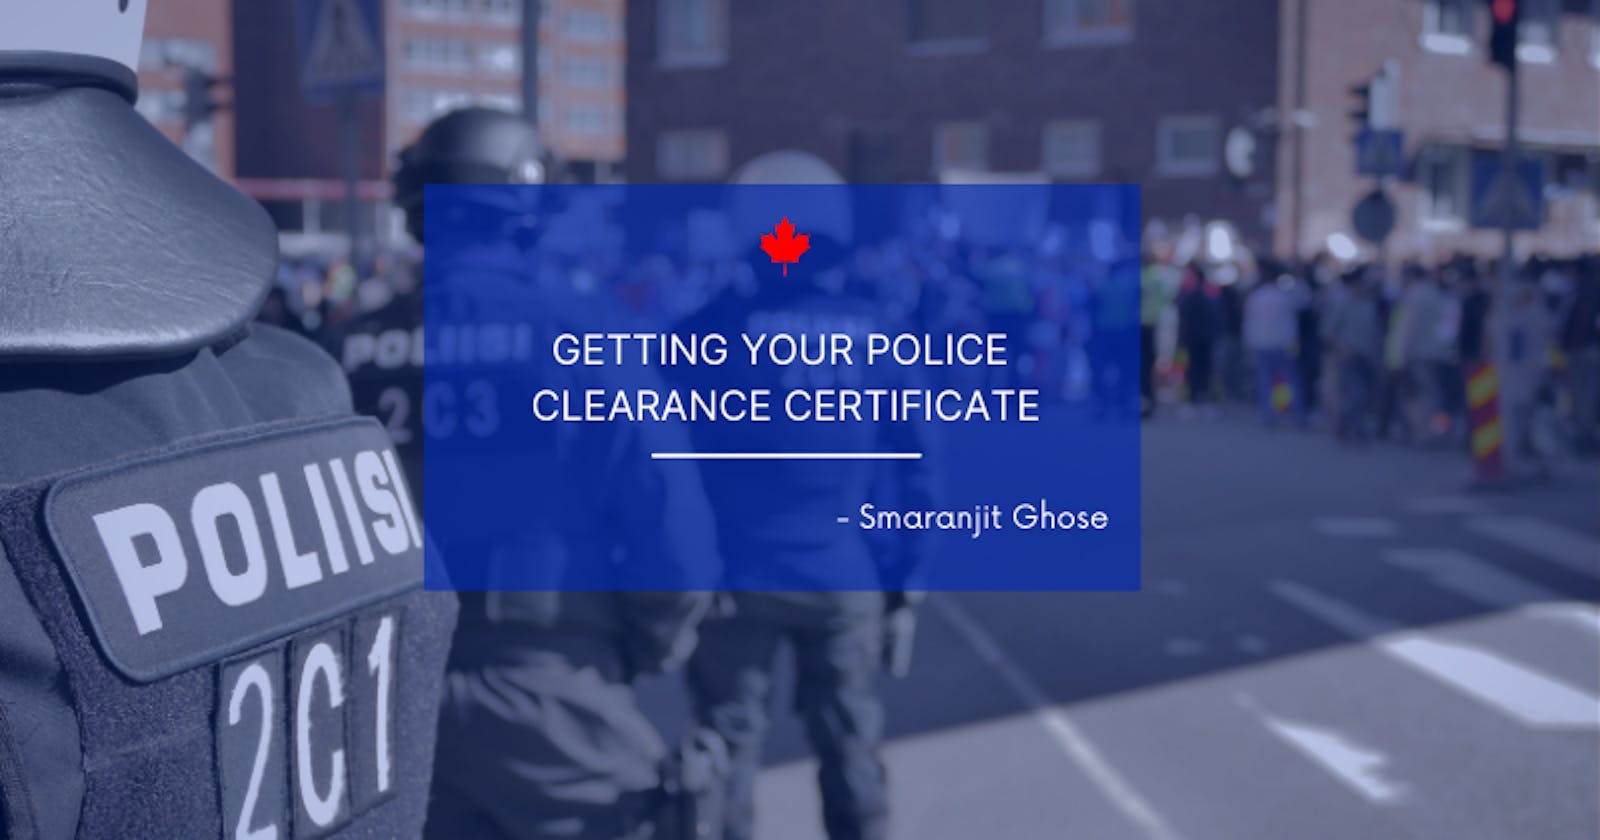 How to get a Police Clearance Certificate?